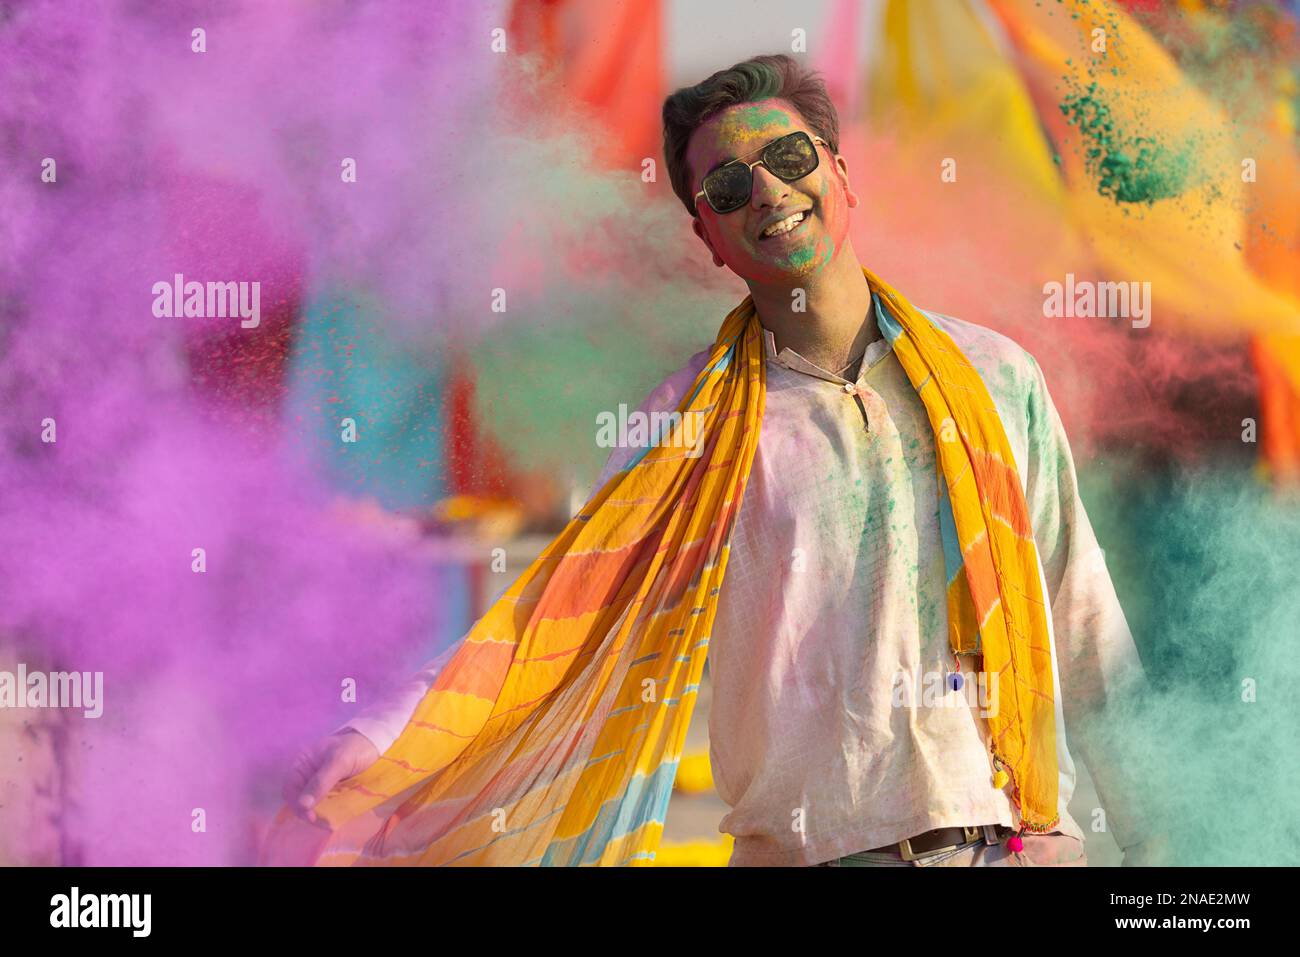 man playing holi and dancing with gulal on his face Stock Photo